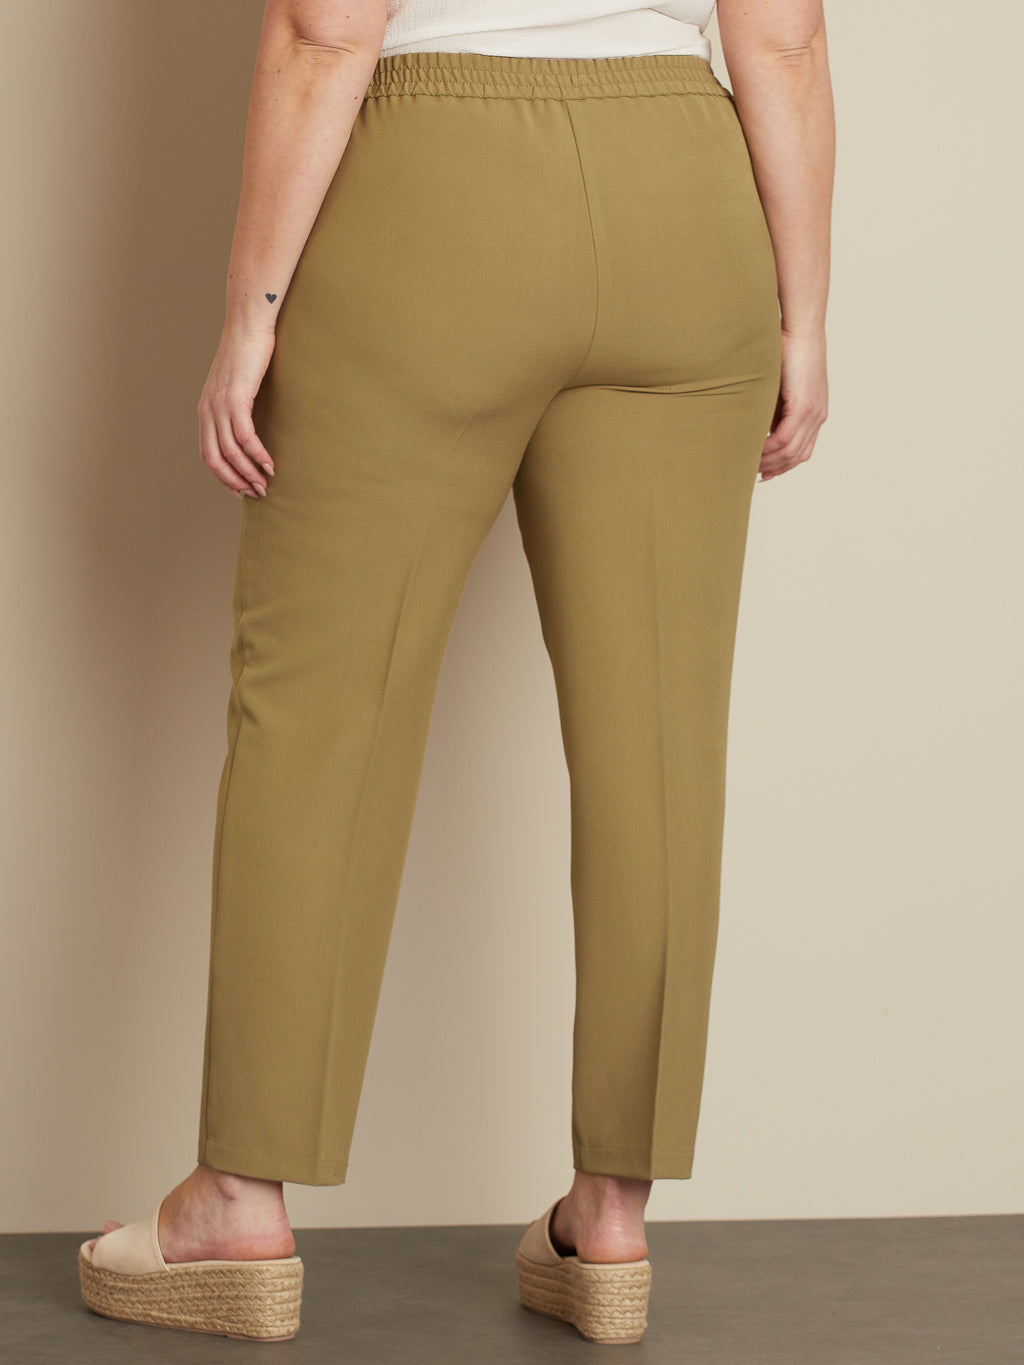 Straight semi-fitted pull-on dress pant  - Petite